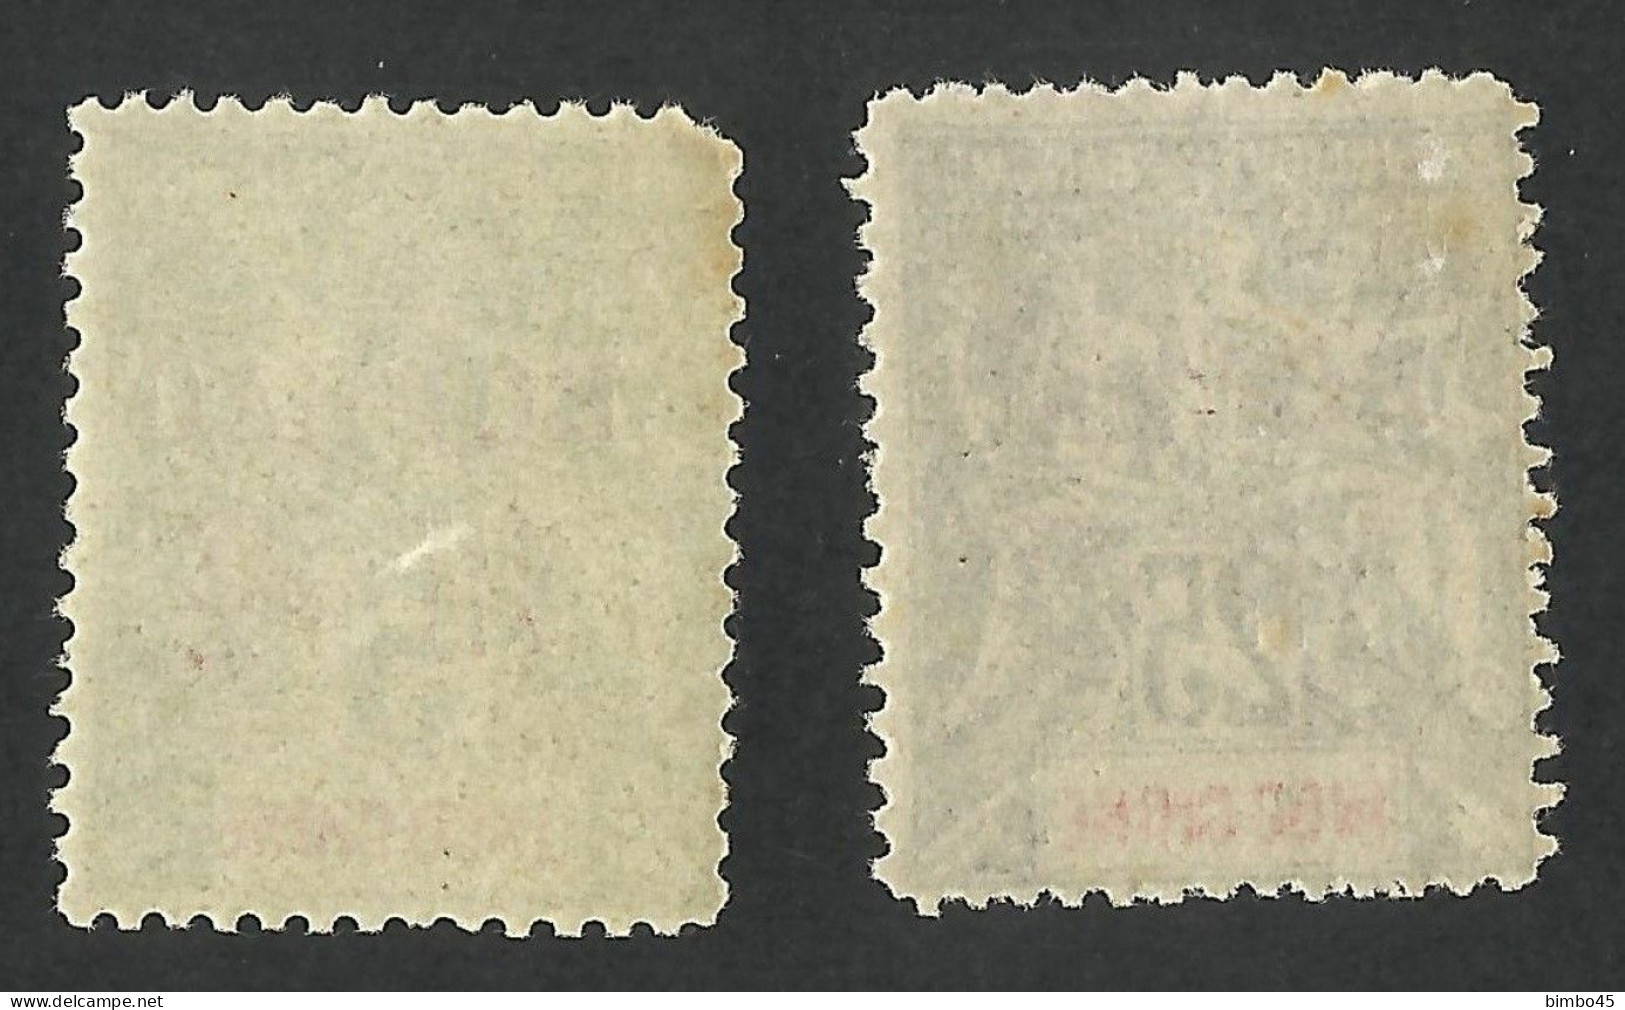 INDO-CHINE / FRENCH POST OFFICE IN HOIHAO / OVERPRINT ,,HOI HAO'' --1901 MNH - Forgery , Faux Fournier - Unused Stamps